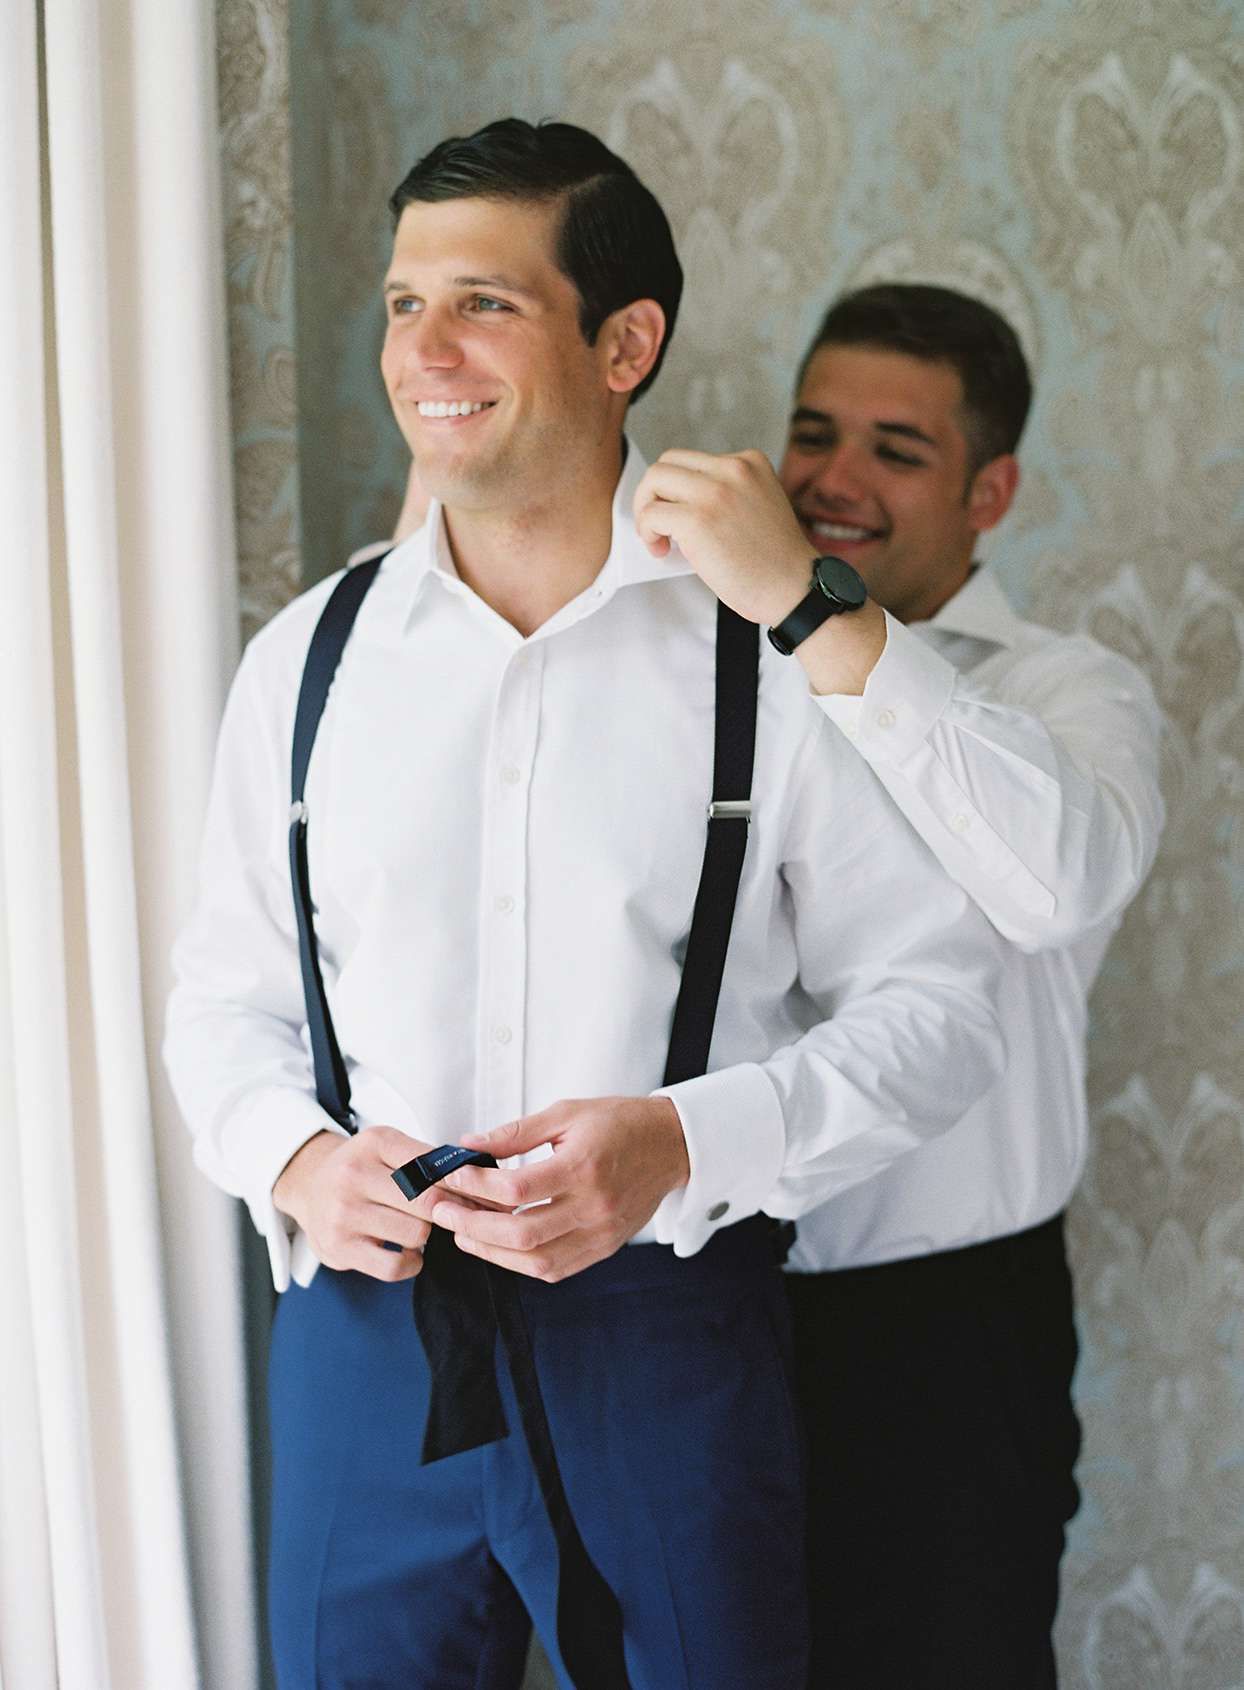 groom smiling while getting ready with groomsmen before wedding